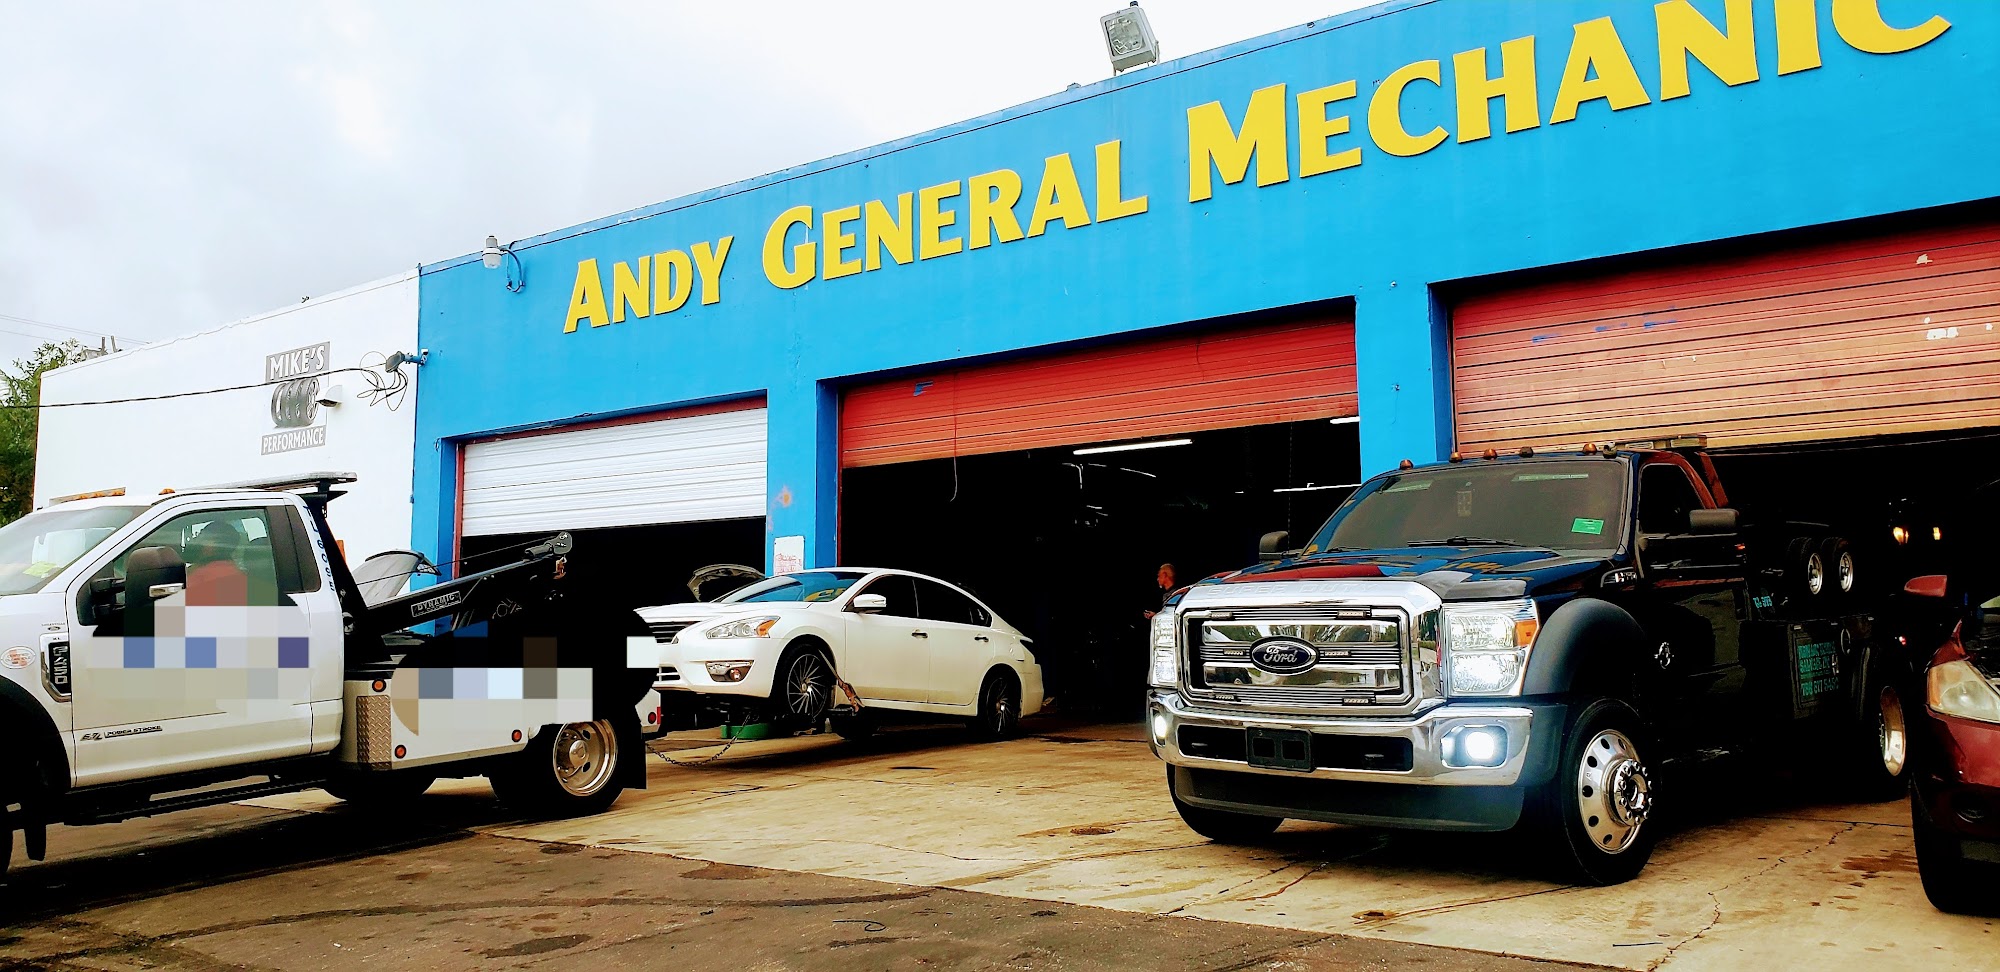 Andy General Mechanic